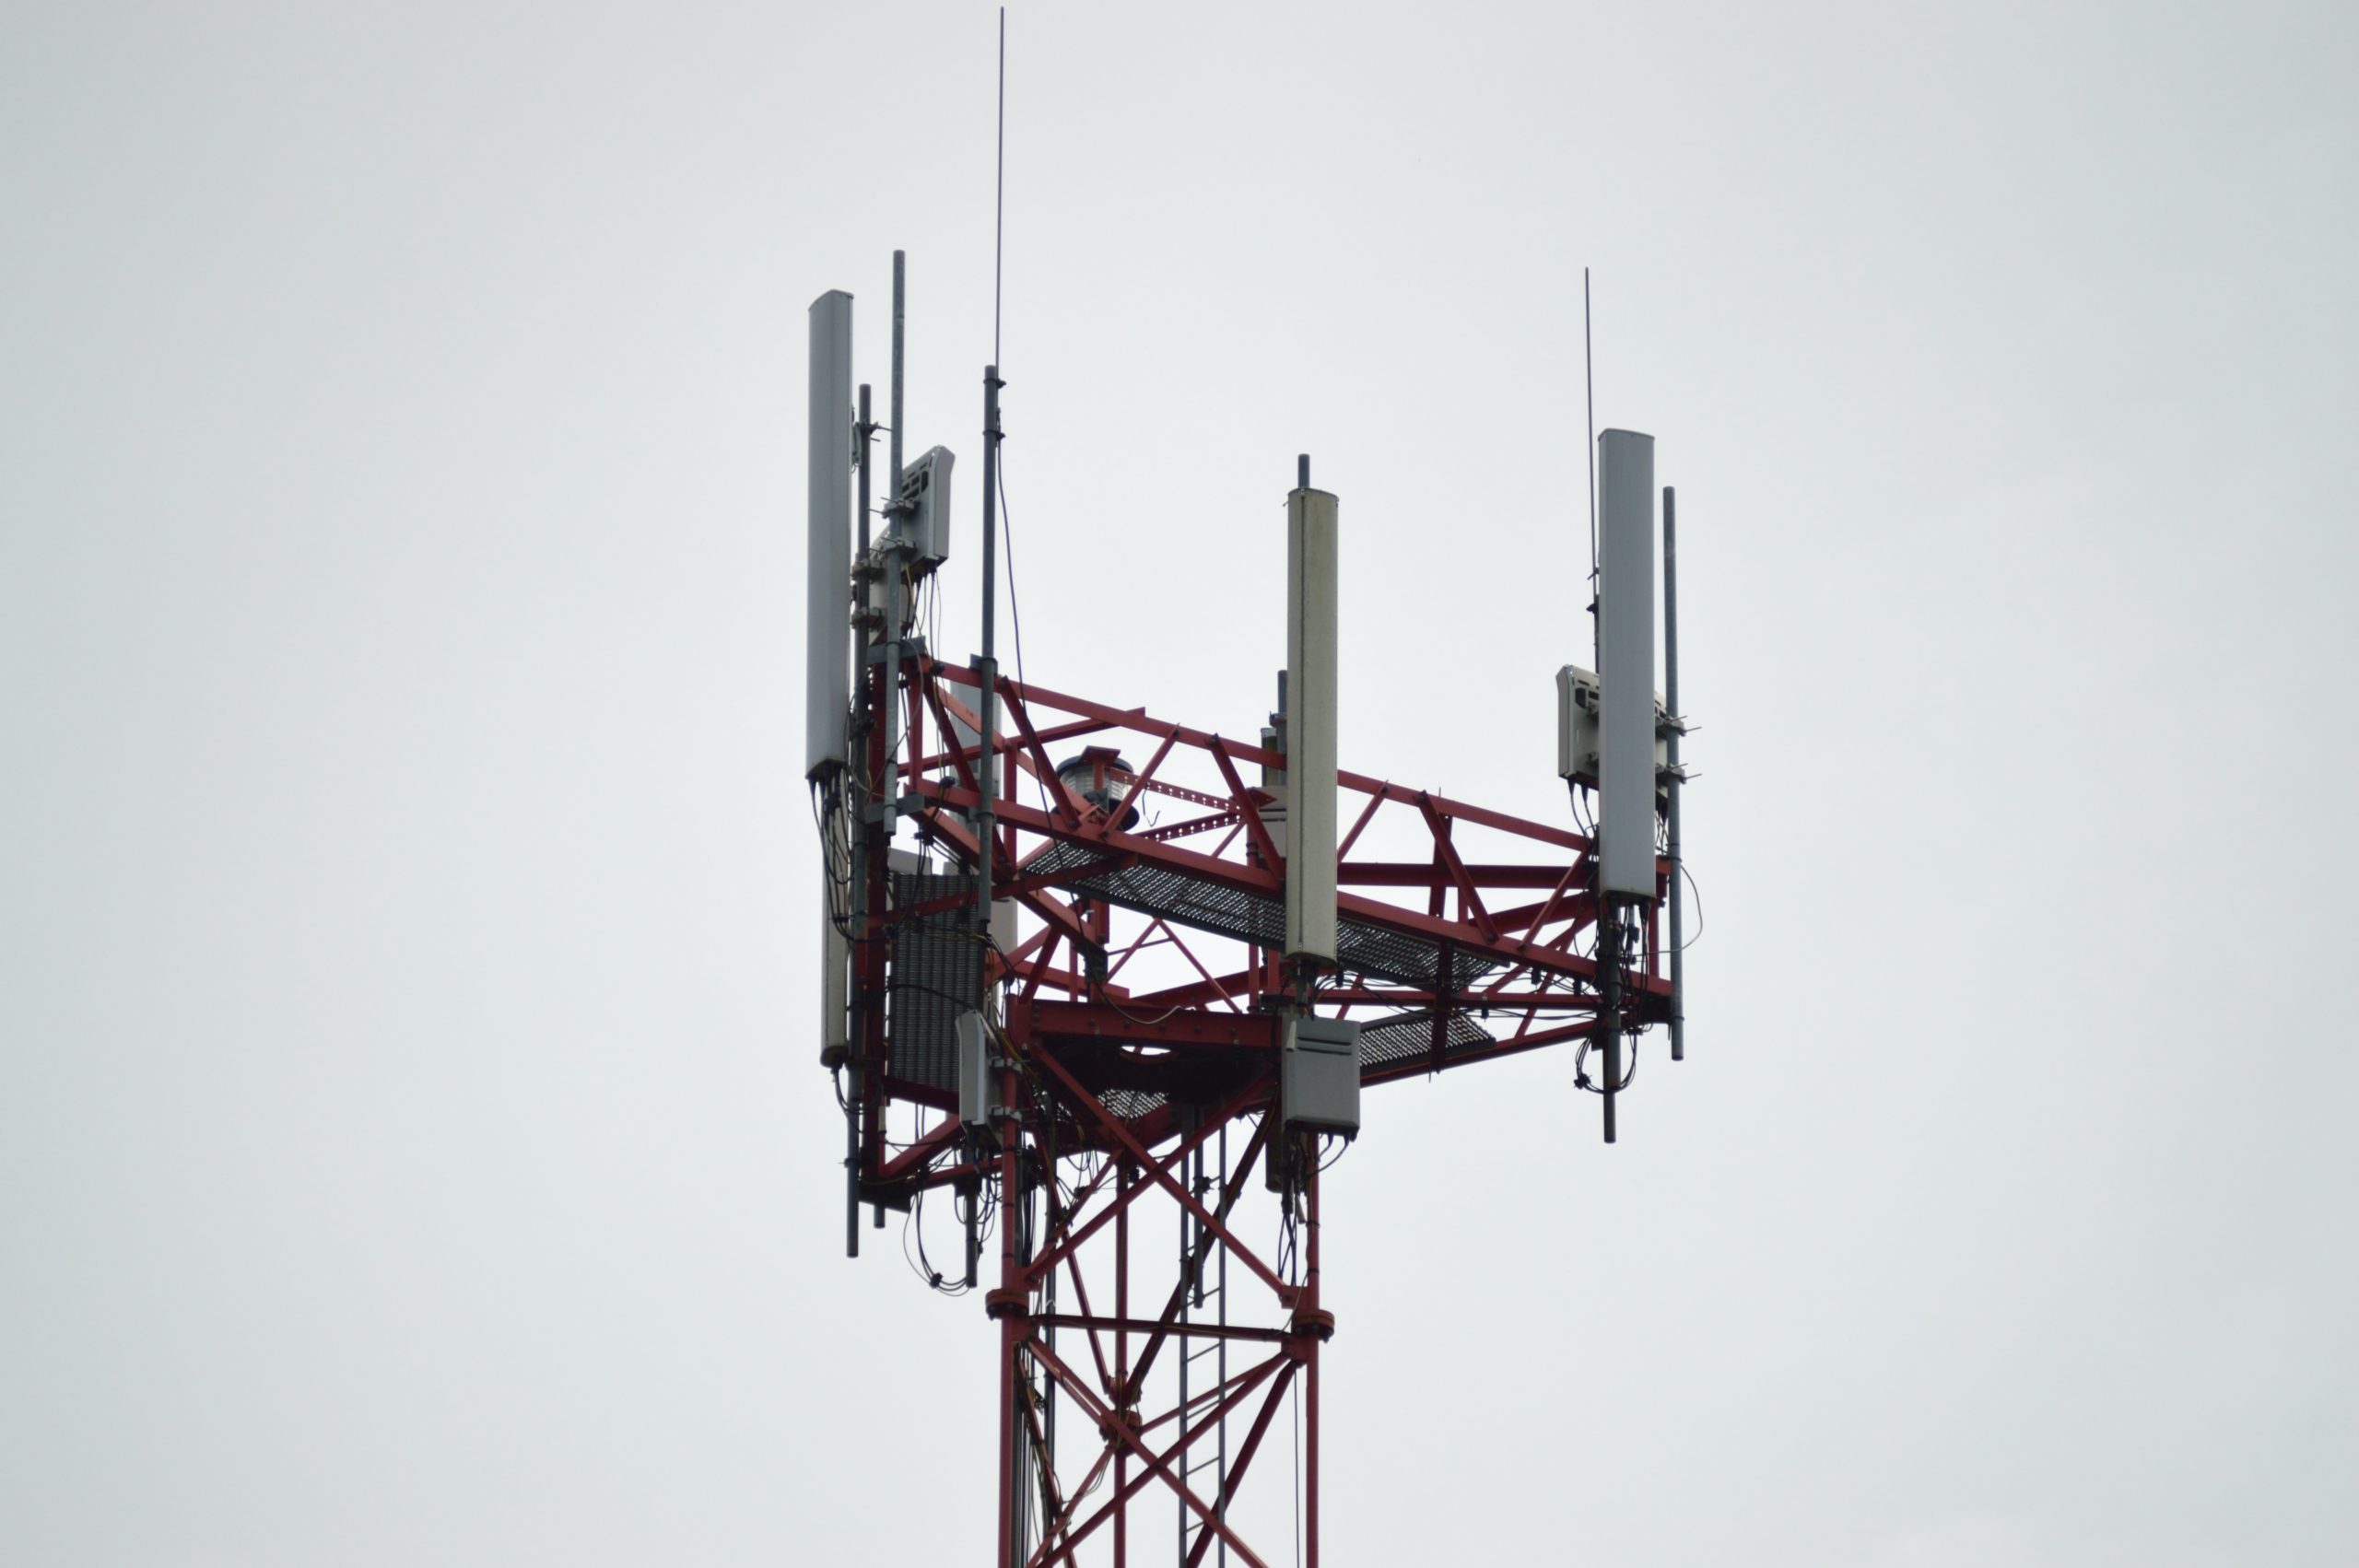 Court denies access to sheriff’s warrants for data from fake cell towers